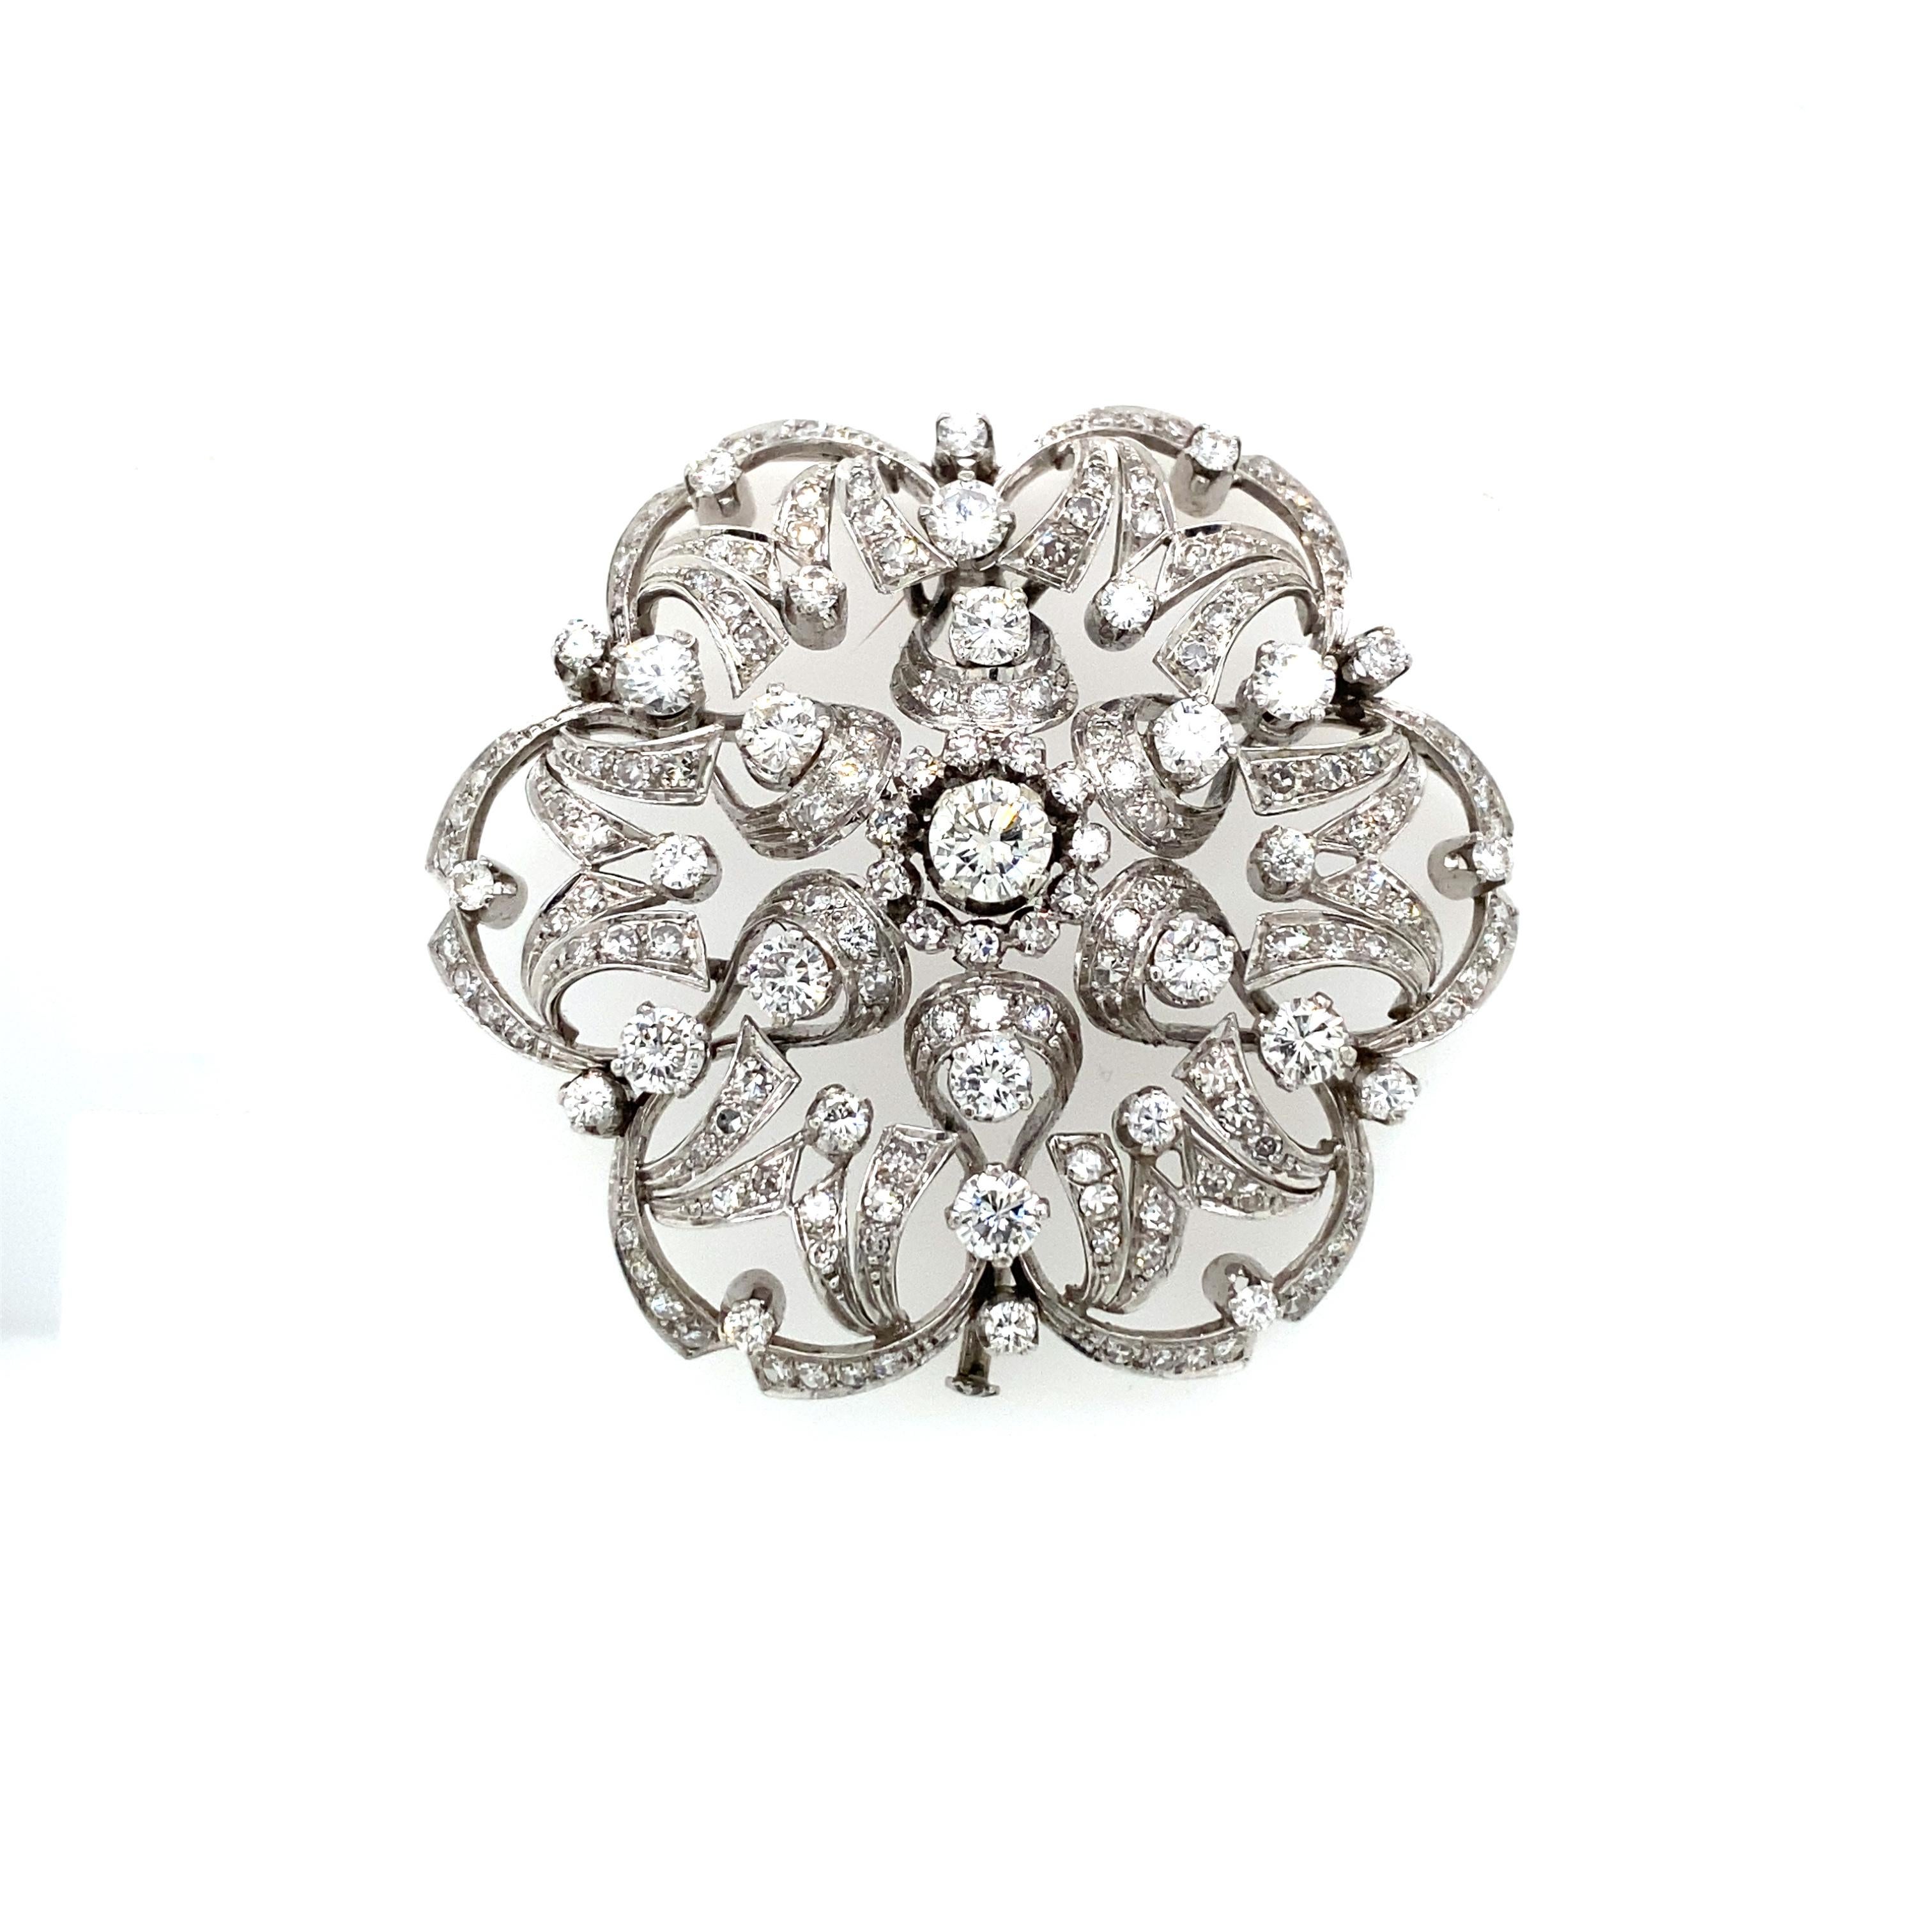 Important Italian Handcraft in 18k white gold Flower Brooch hallmarked 652 AL (Valenza), set with approx. 5.50 ct. of round brilliant cut diamonds G color VVS clarity. This piece is designed and crafted entirely by hand in the traditional way, using